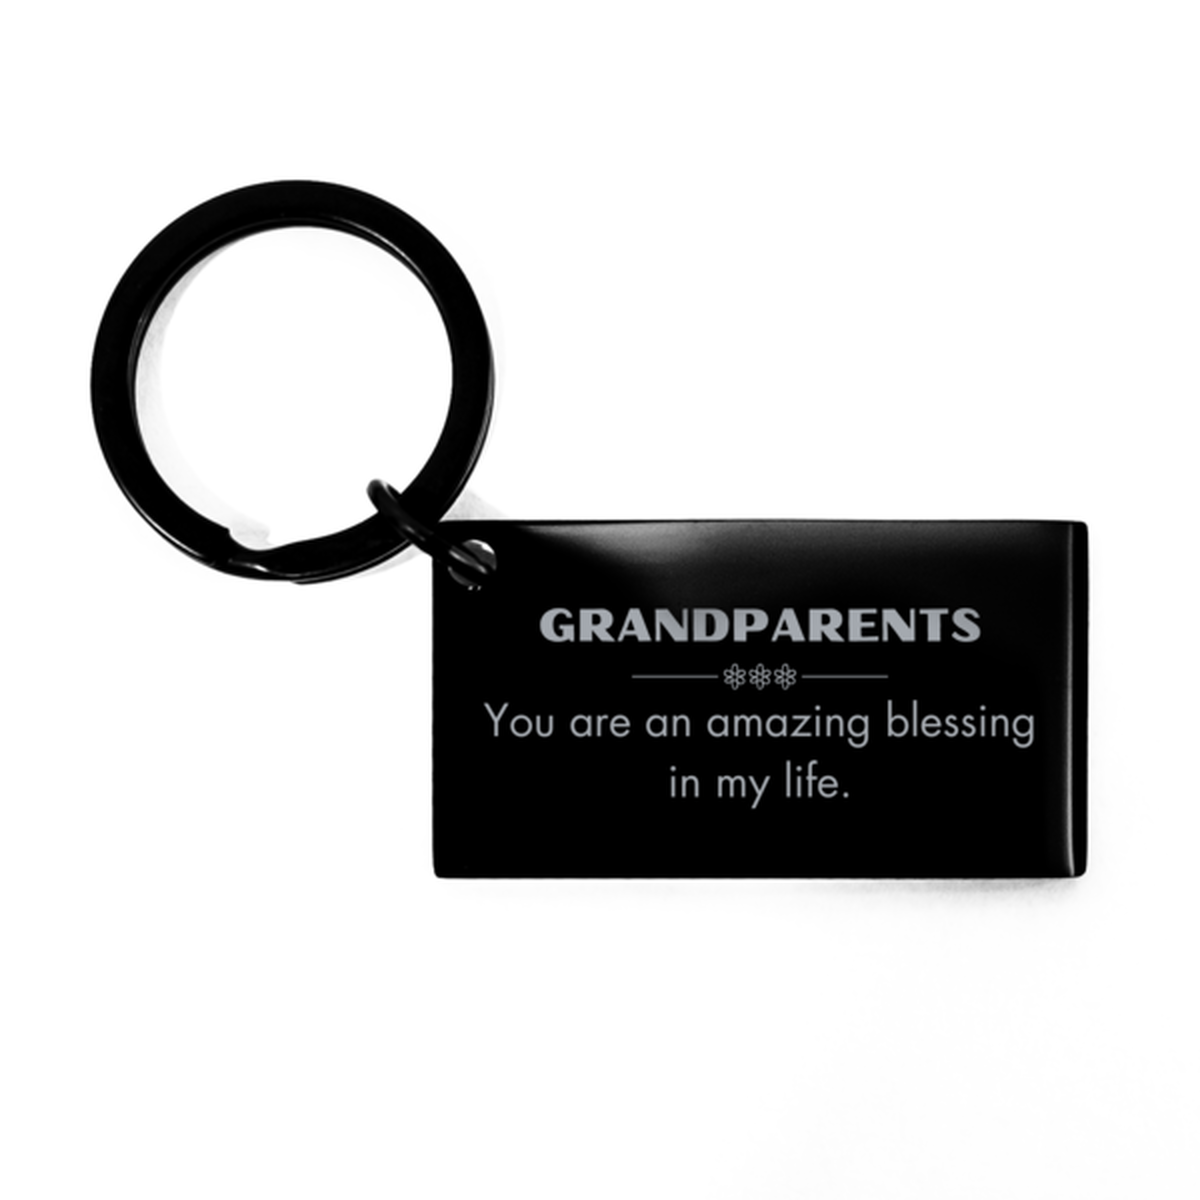 Grandparents Keychain, You are an amazing blessing in my life, Thank You Gifts For Grandparents, Inspirational Birthday Christmas Unique Gifts For Grandparents